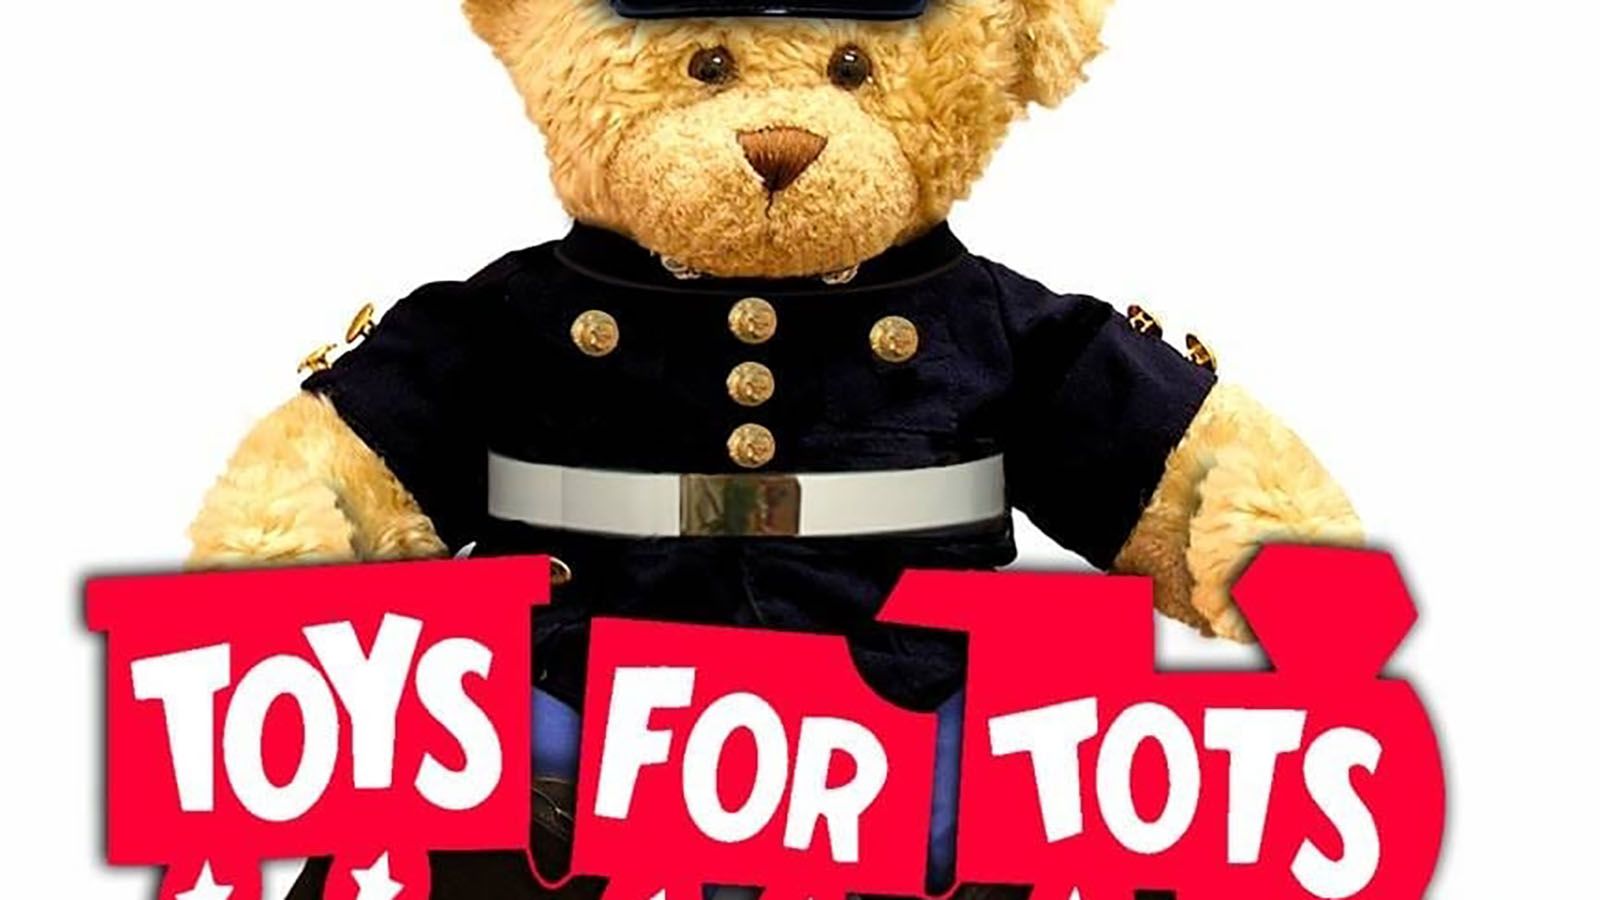 You can receive a BOGO offer on some Clyde shows if you bring in a $20 toy to be donated to Toys for Tots by Dec. 3.